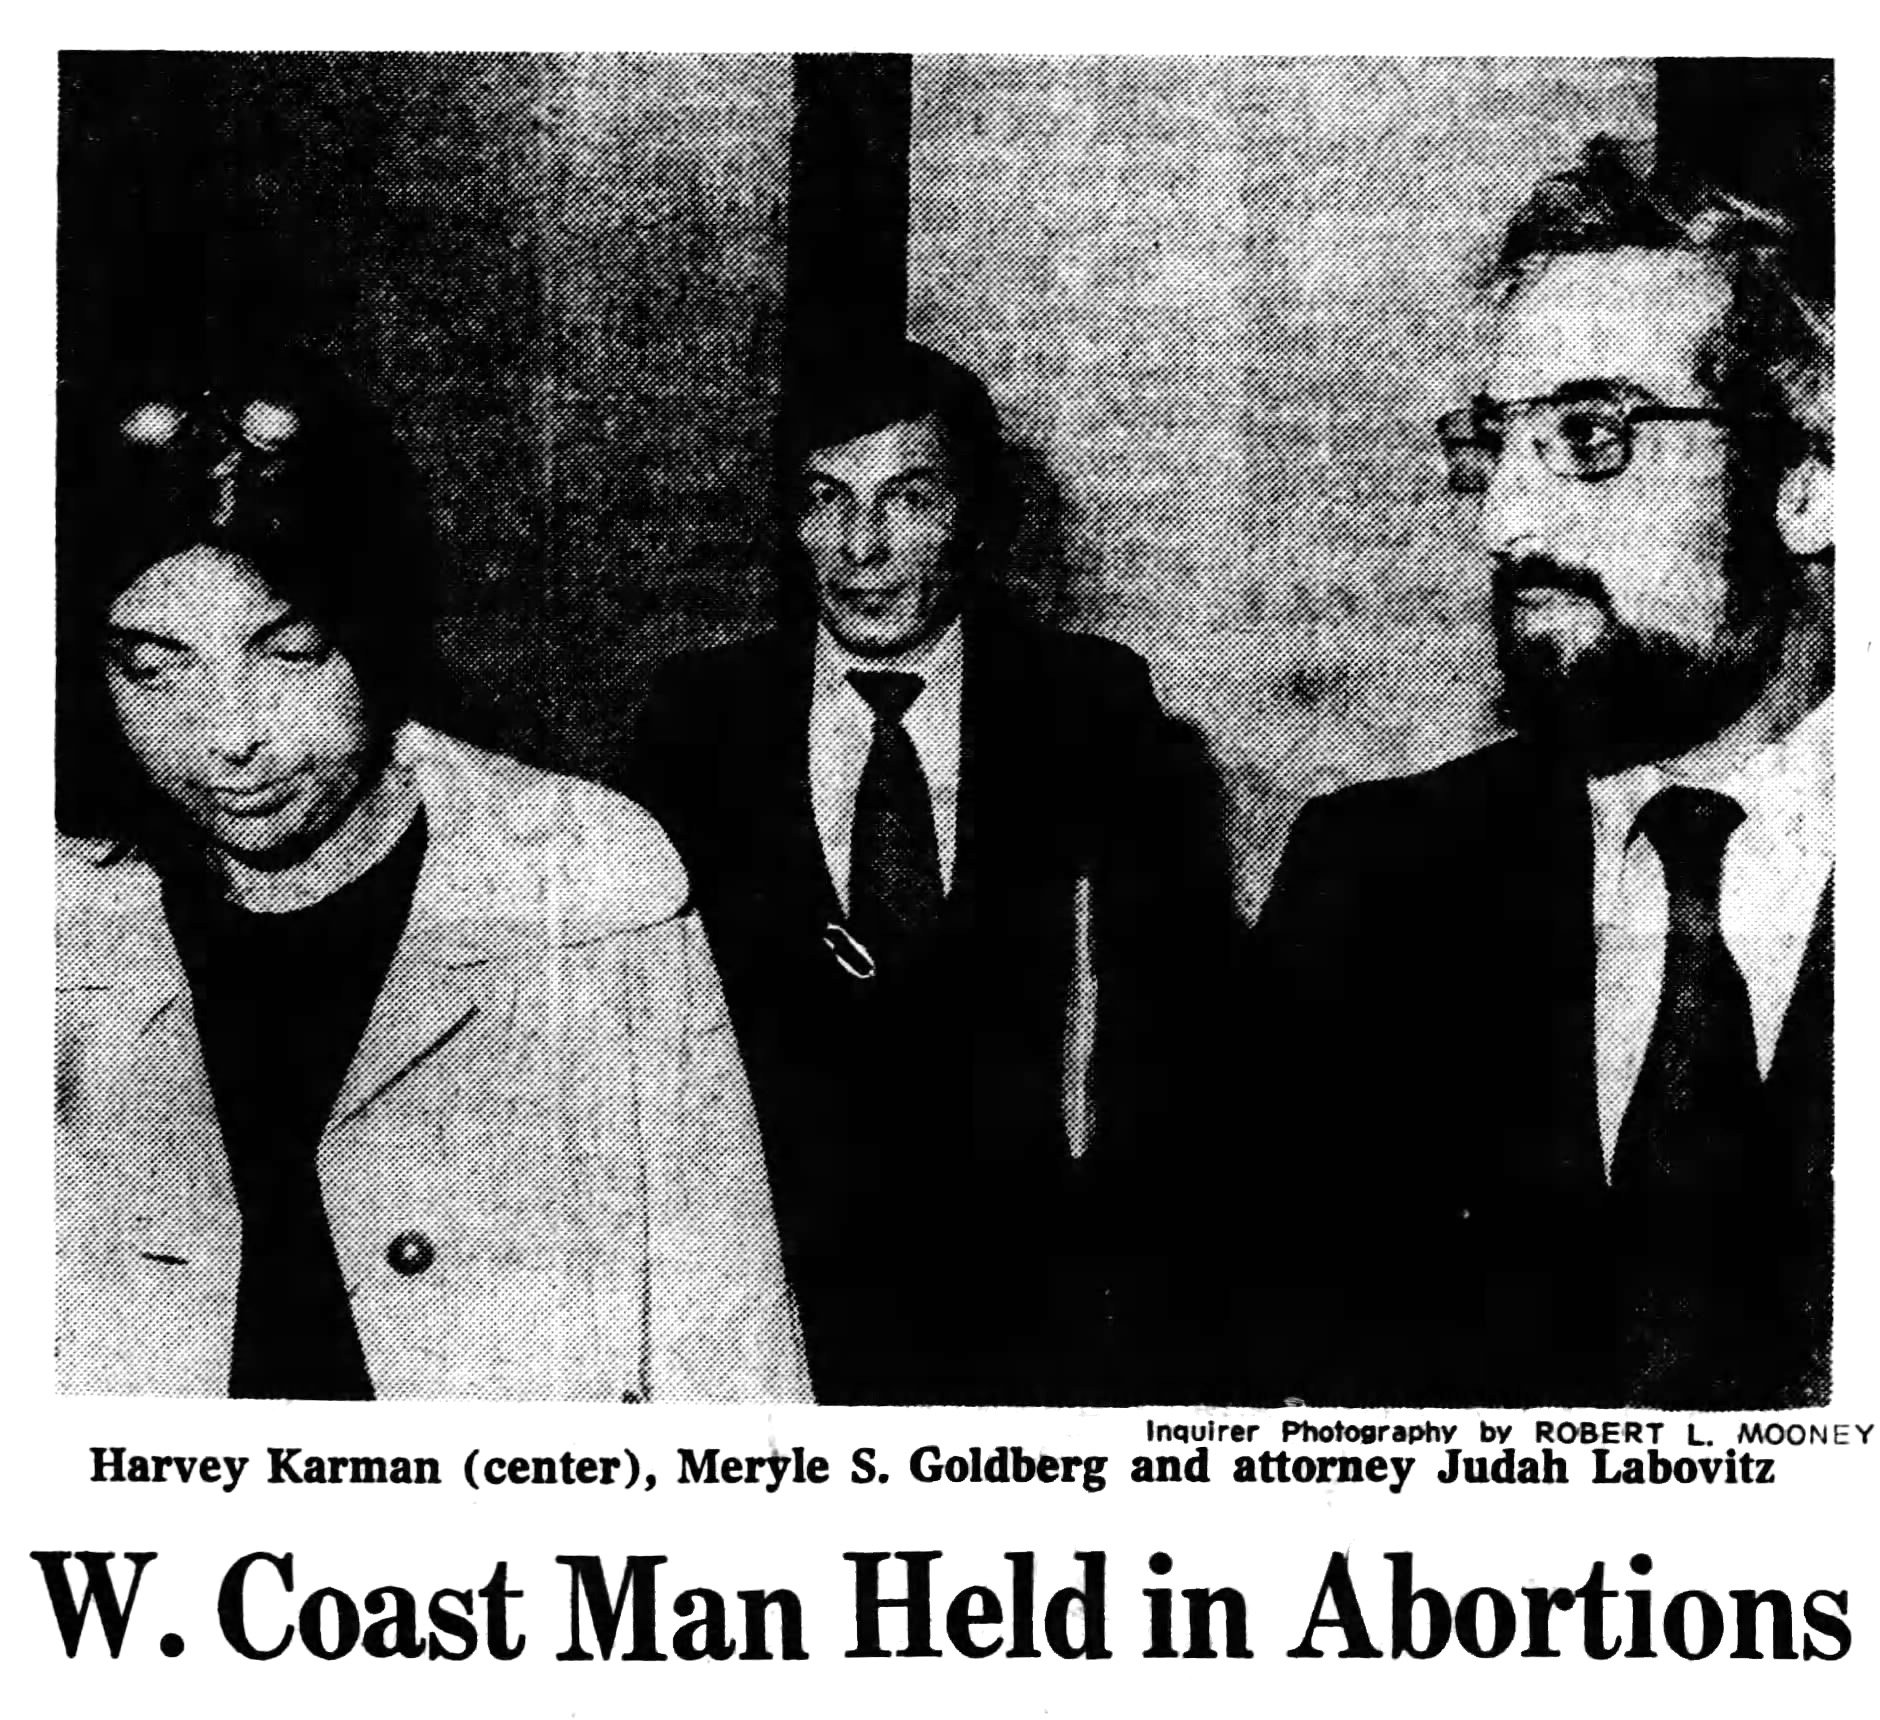 W. Coast Man Held in Abortion, The Philadelphia Inquirer (1972)